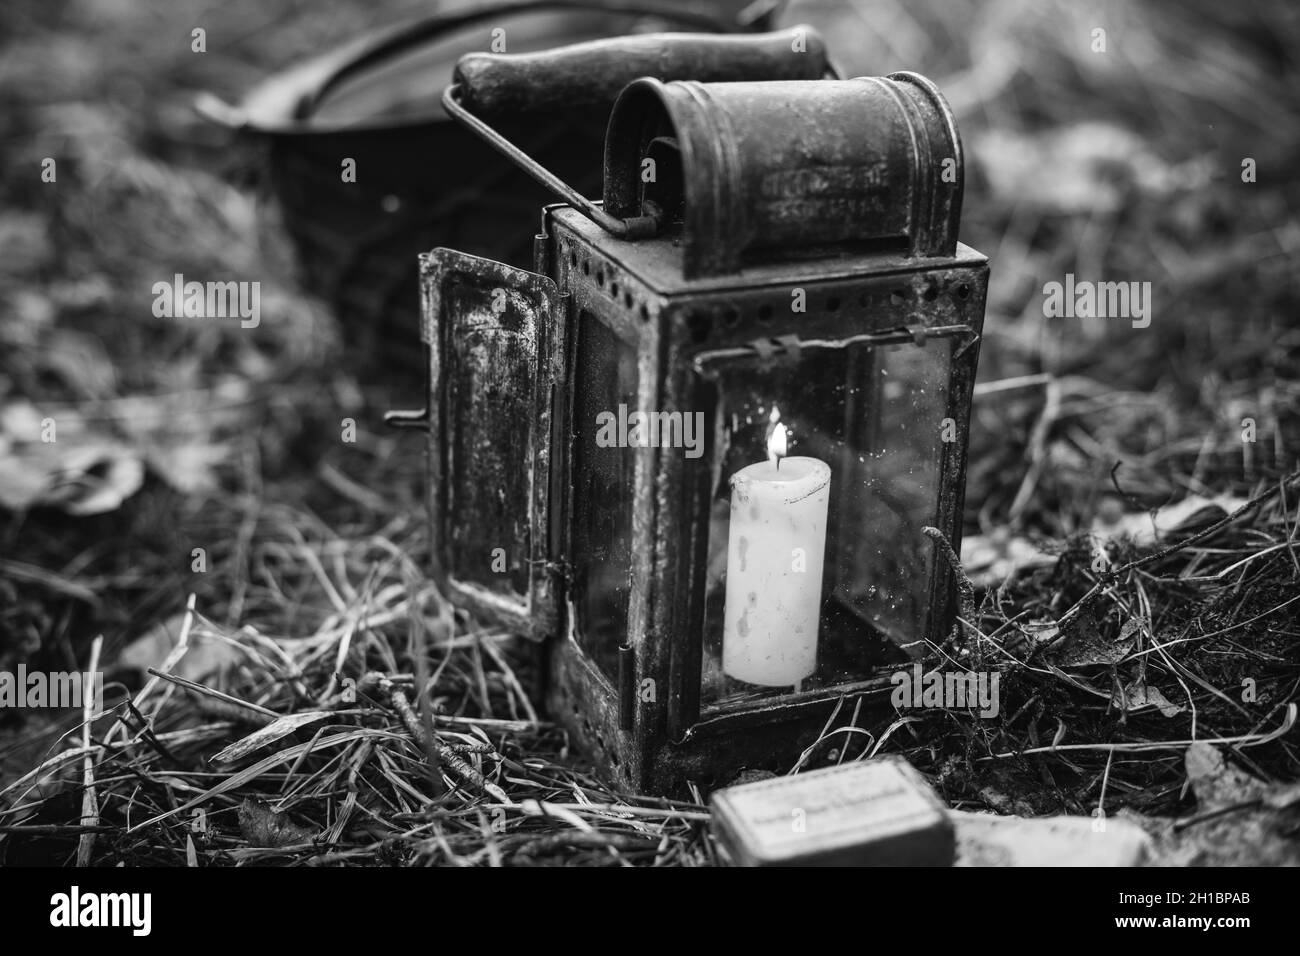 Old German Wehrmacht Times Of World War II Vintage Lantern With Burning Candle On Forest Ground Stock Photo